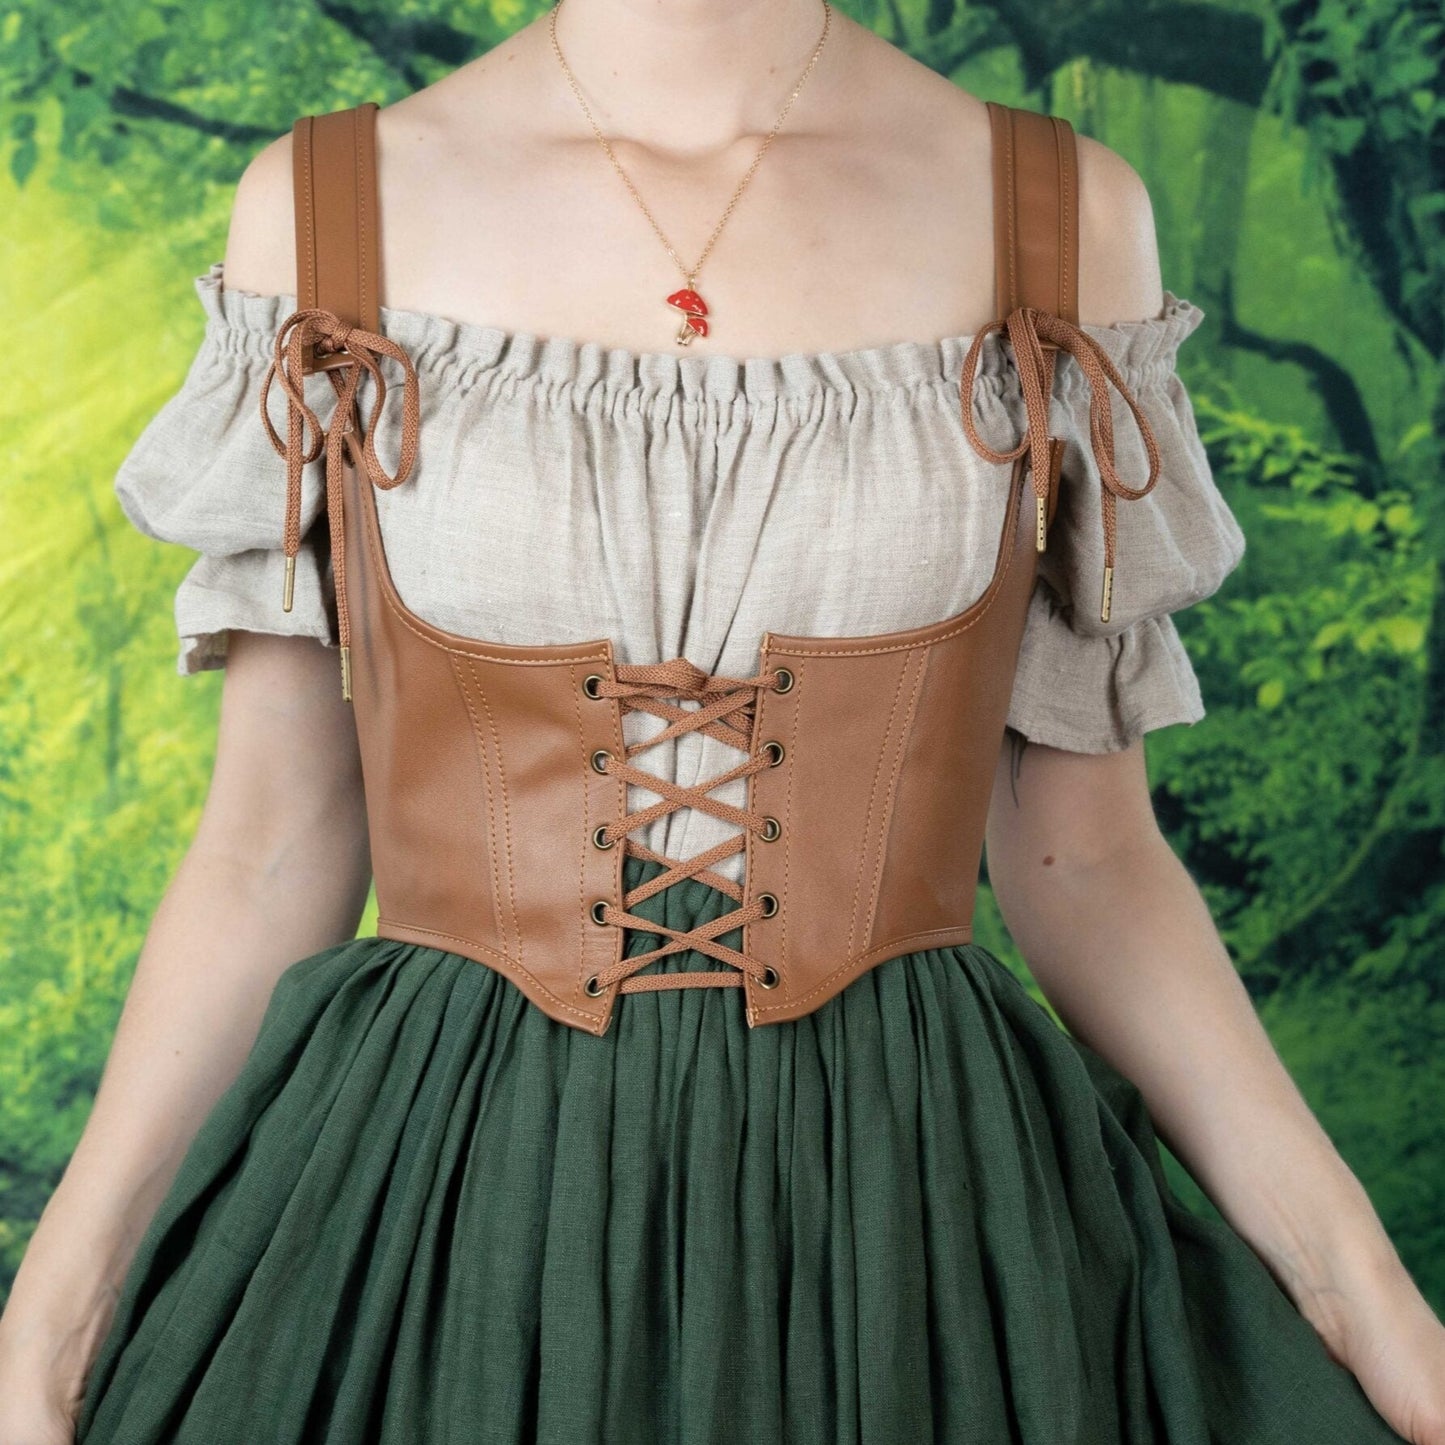 Corset Tops for Women Medieval Bustier Overbust Lace Up Bodice